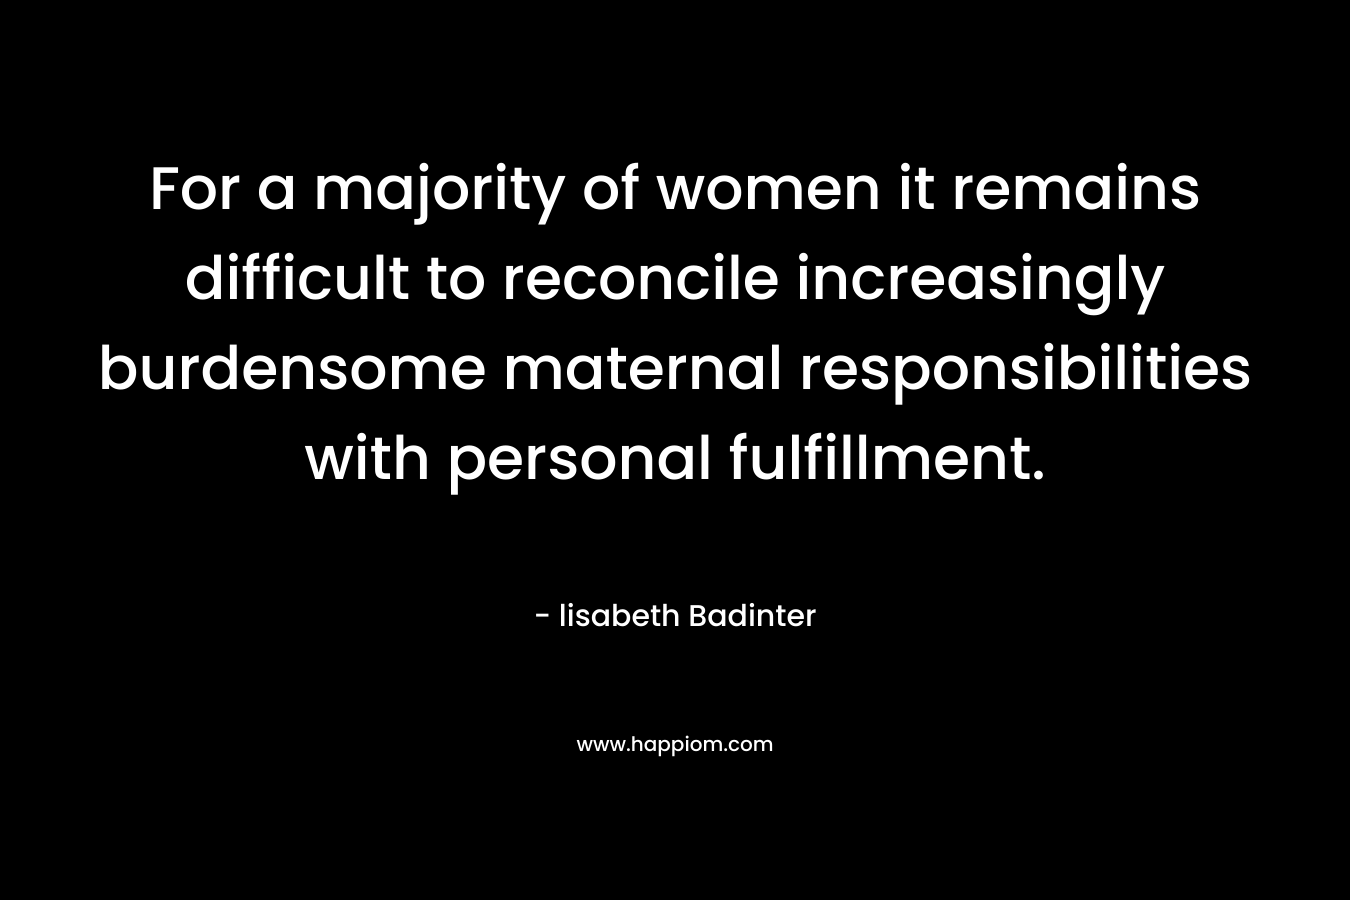 For a majority of women it remains difficult to reconcile increasingly burdensome maternal responsibilities with personal fulfillment.